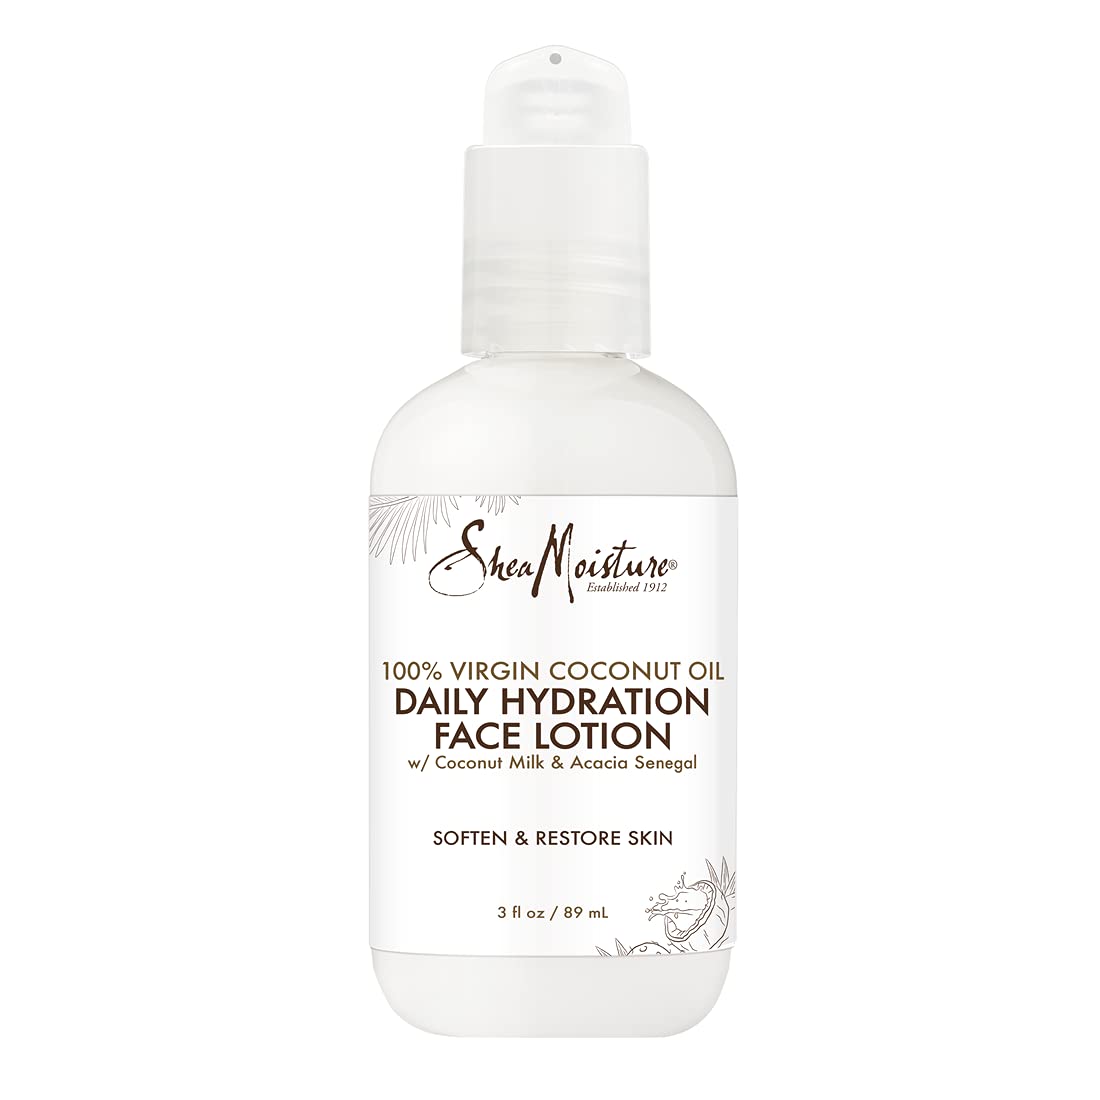 Sheamoisture Daily Hydration Face Lotion for All Skin Types 100% Virgin Coconut Oil for Daily Hydration 3